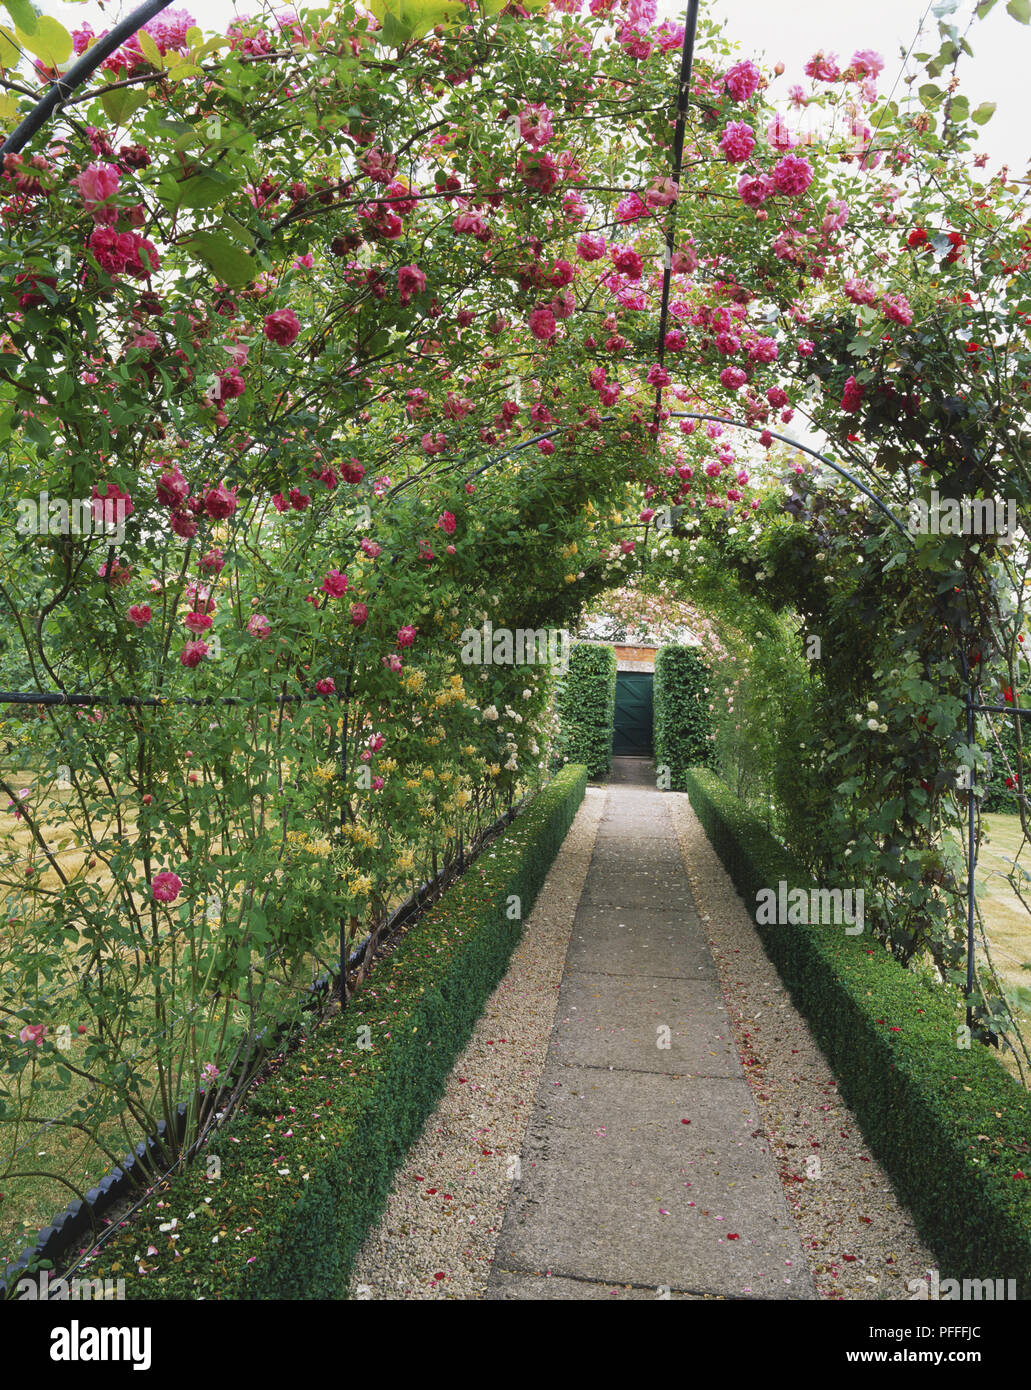 Pink Roses growing on tunnel-shaped pergola in garden Stock Photo